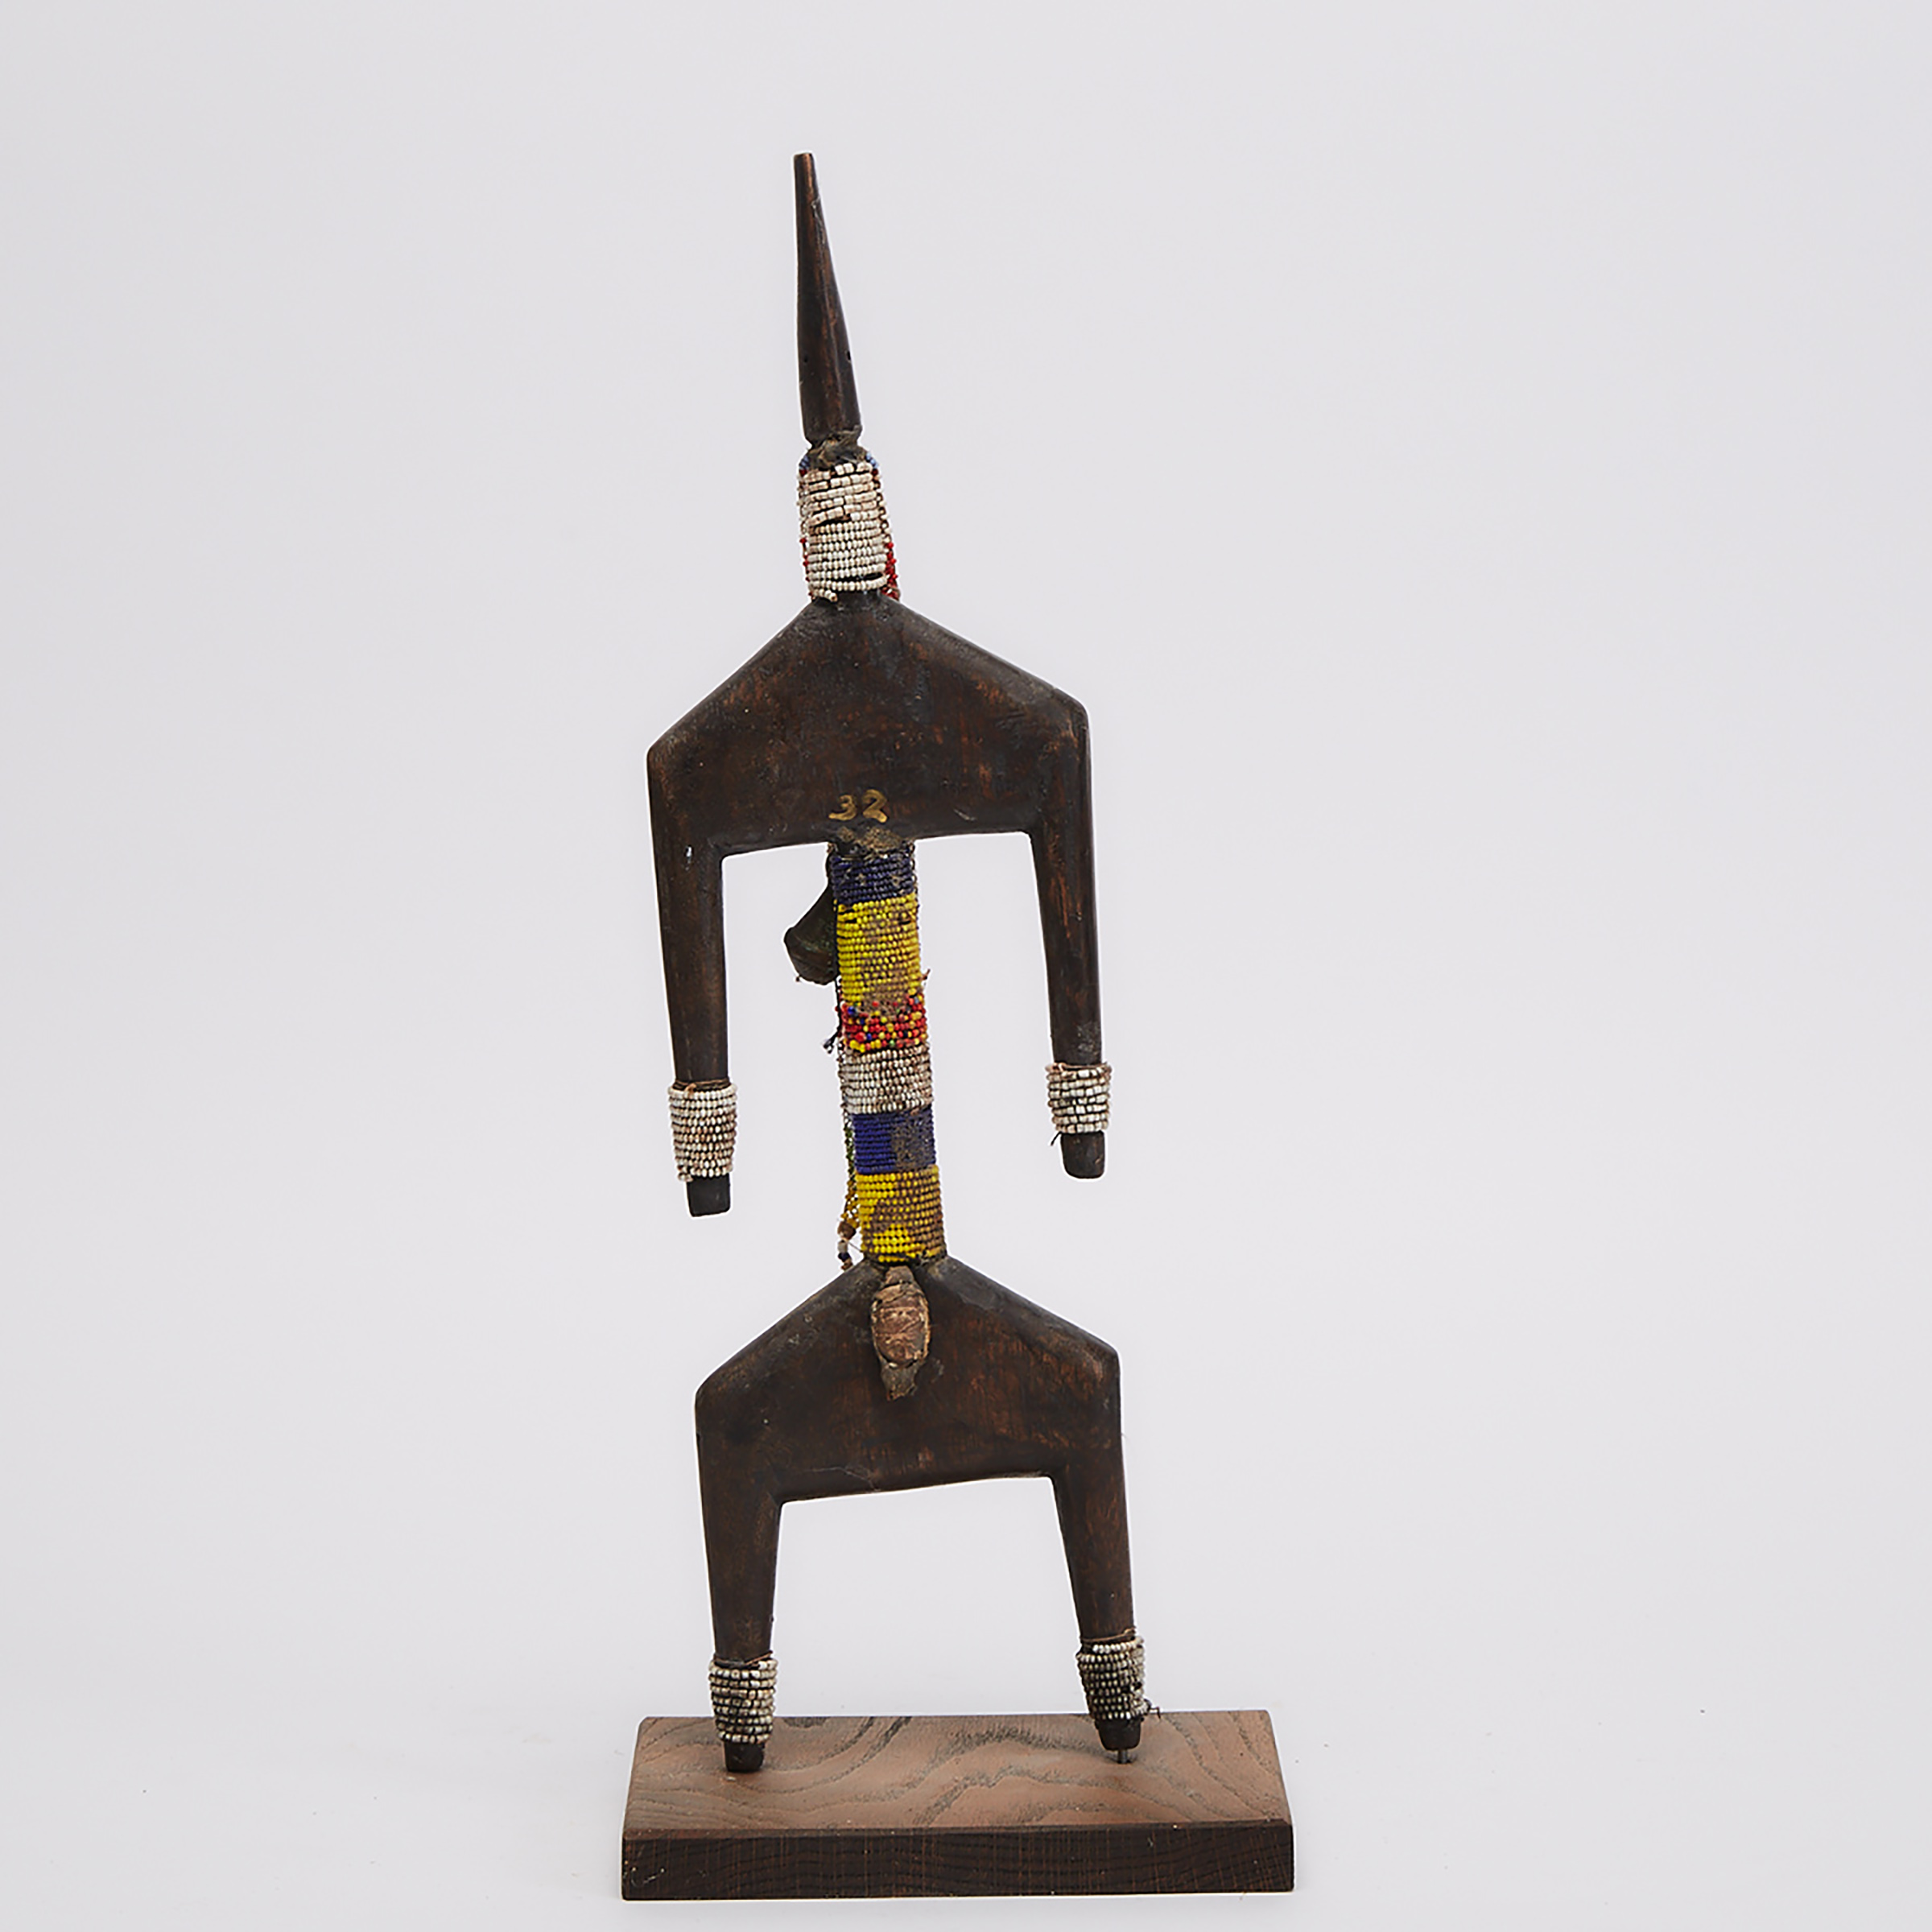 Namji Doll, Cameroon, Central Africa